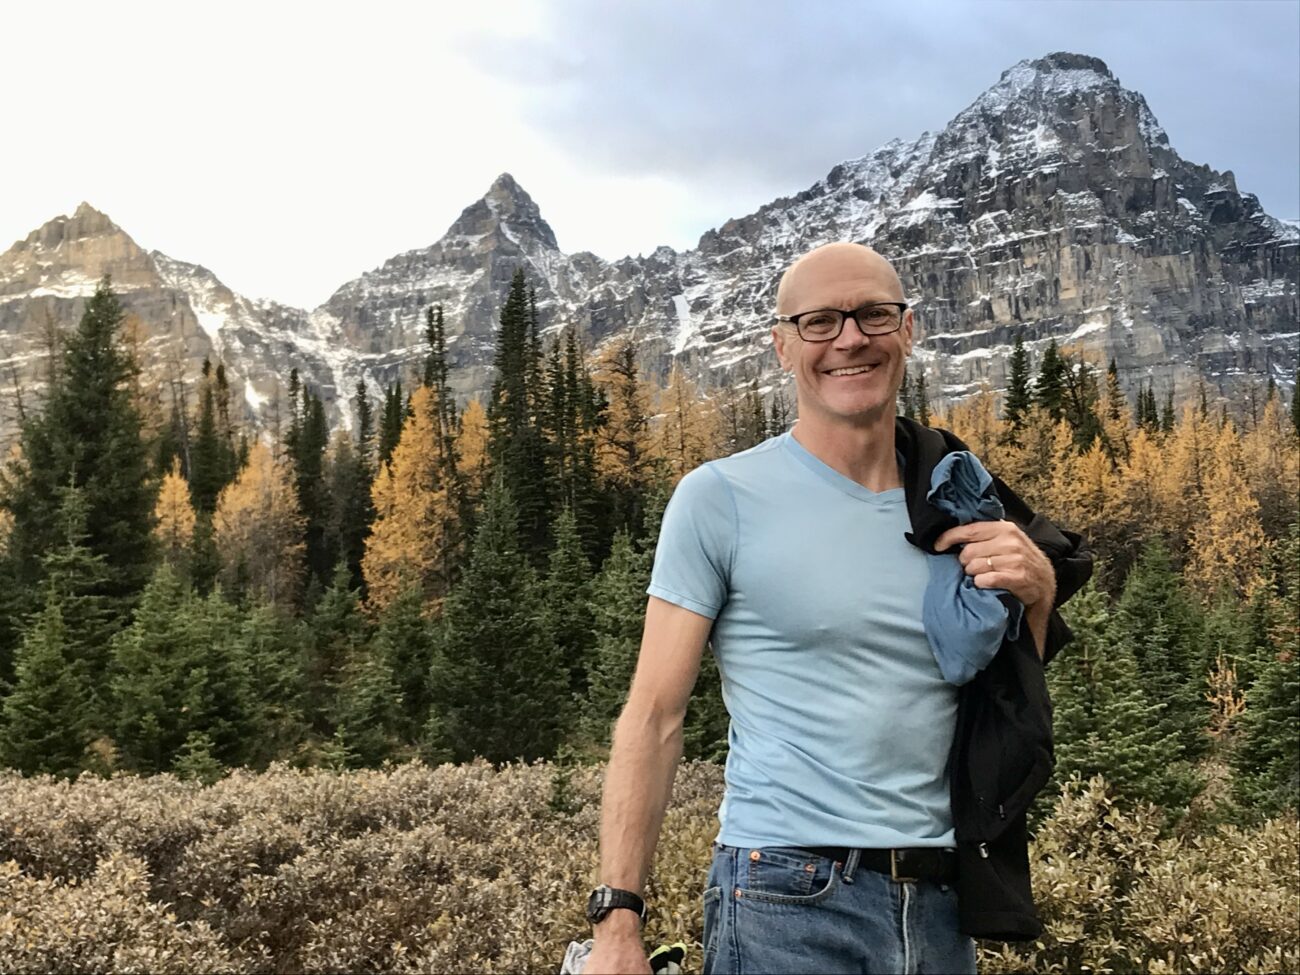 Andrew Hallam stands in front of a mountain and forest.